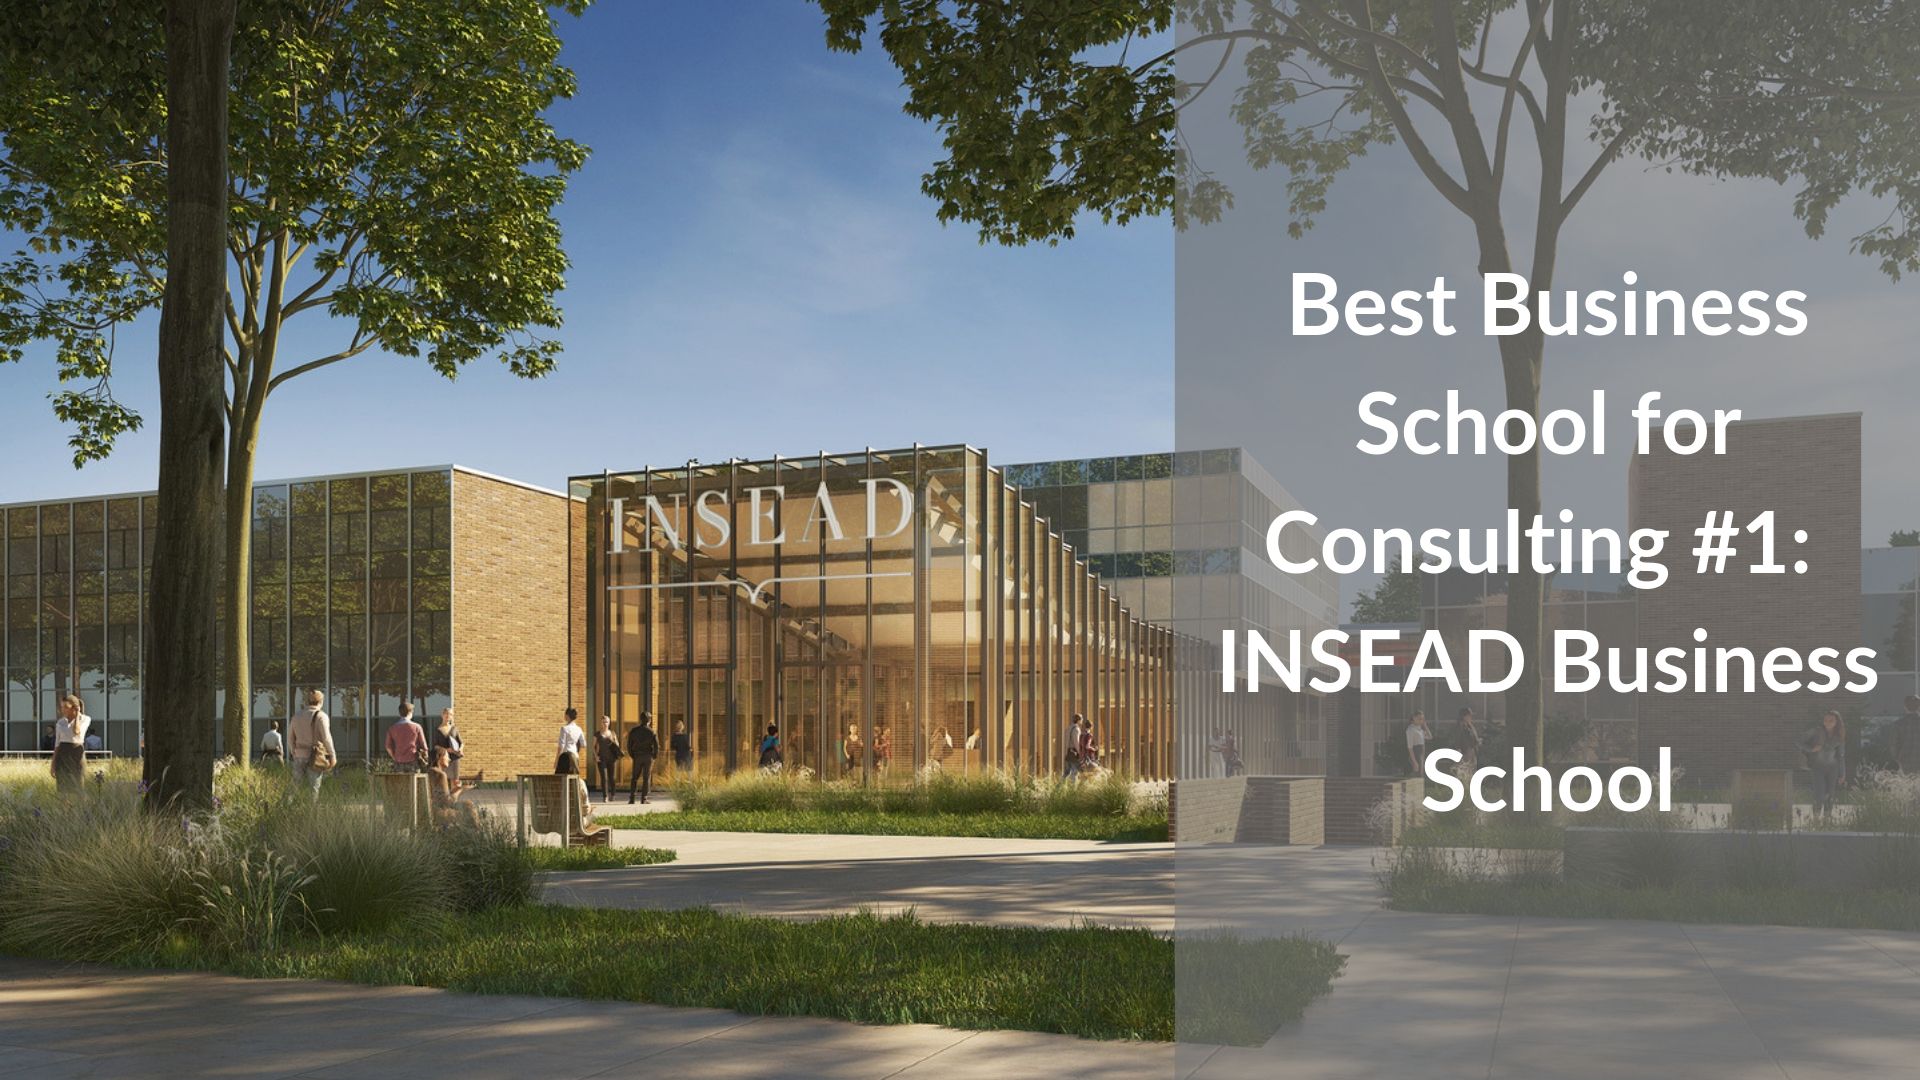 Best Business School for Consulting #1 - INSEAD Business School